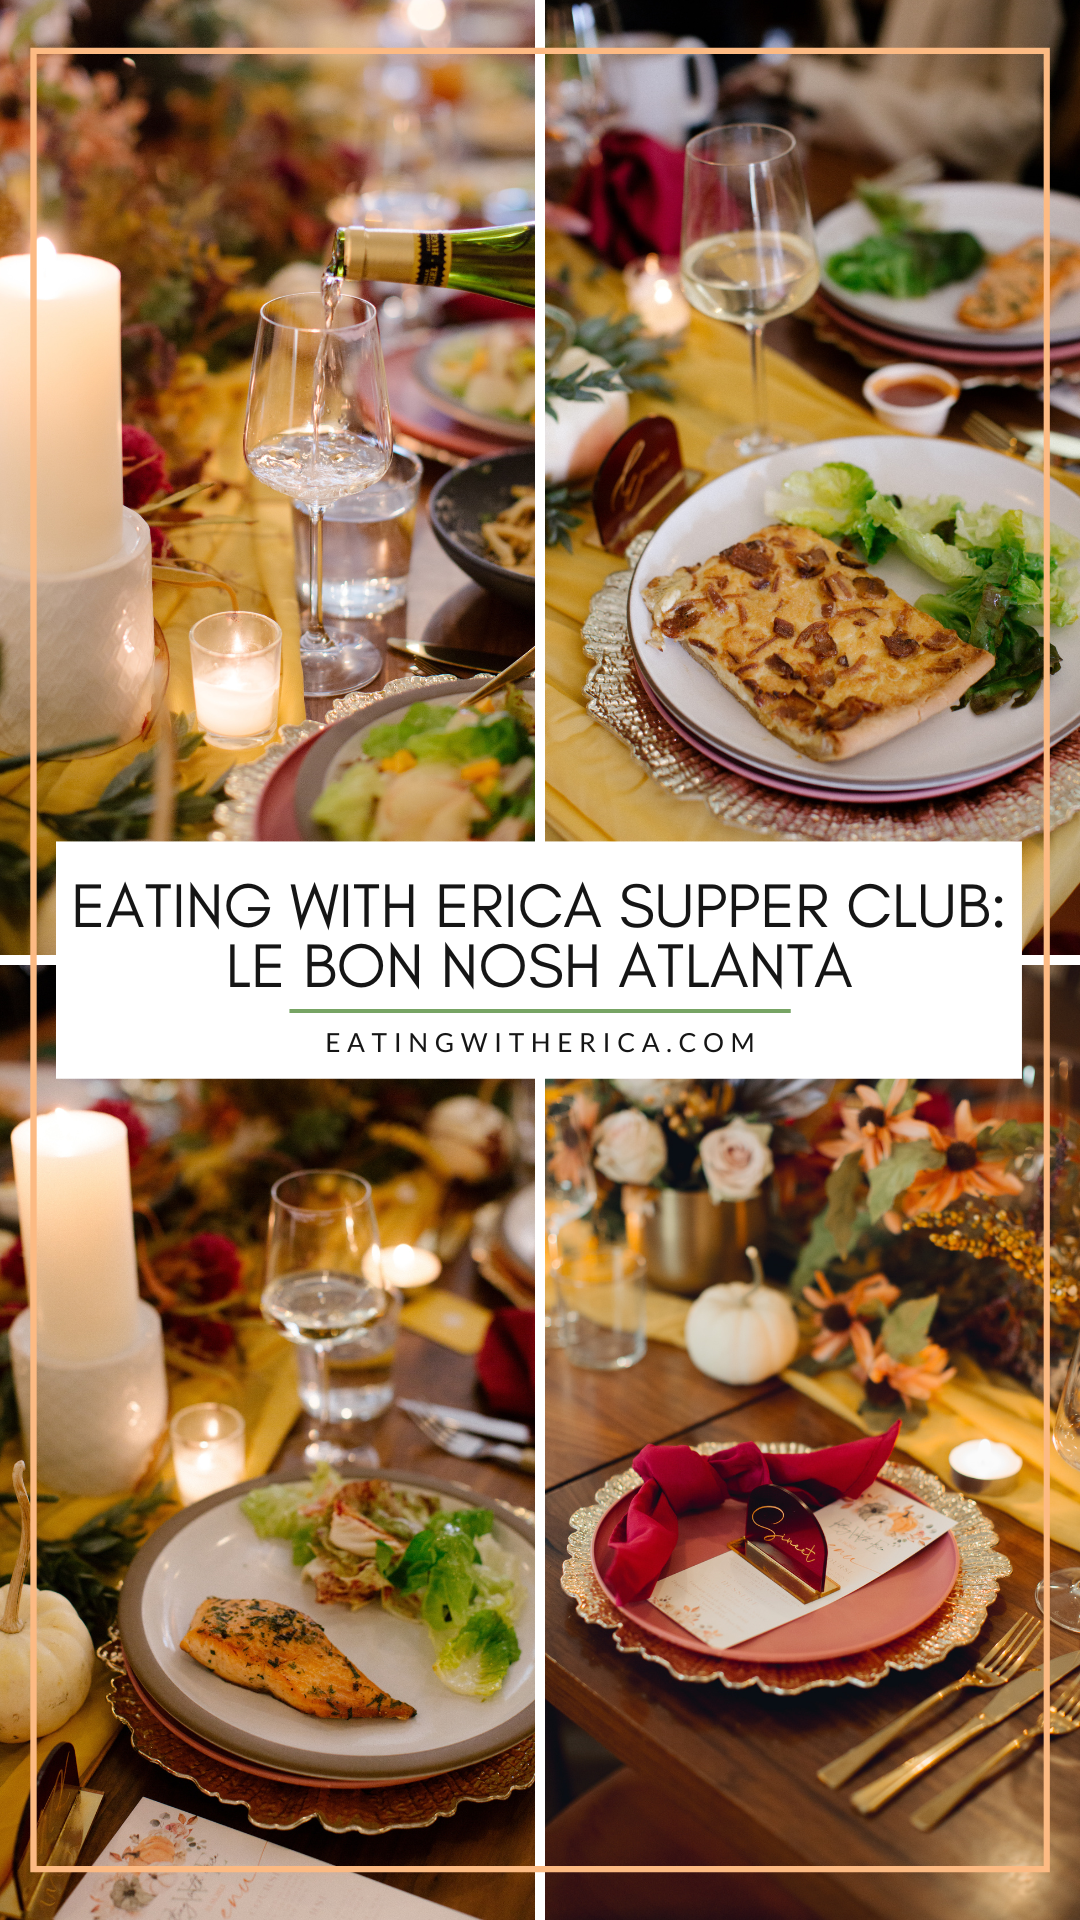 Looking for your next Atlanta dining experience? CLICK HERE to see why you need to try Le Bon Nosh in Buckhead ASAP!